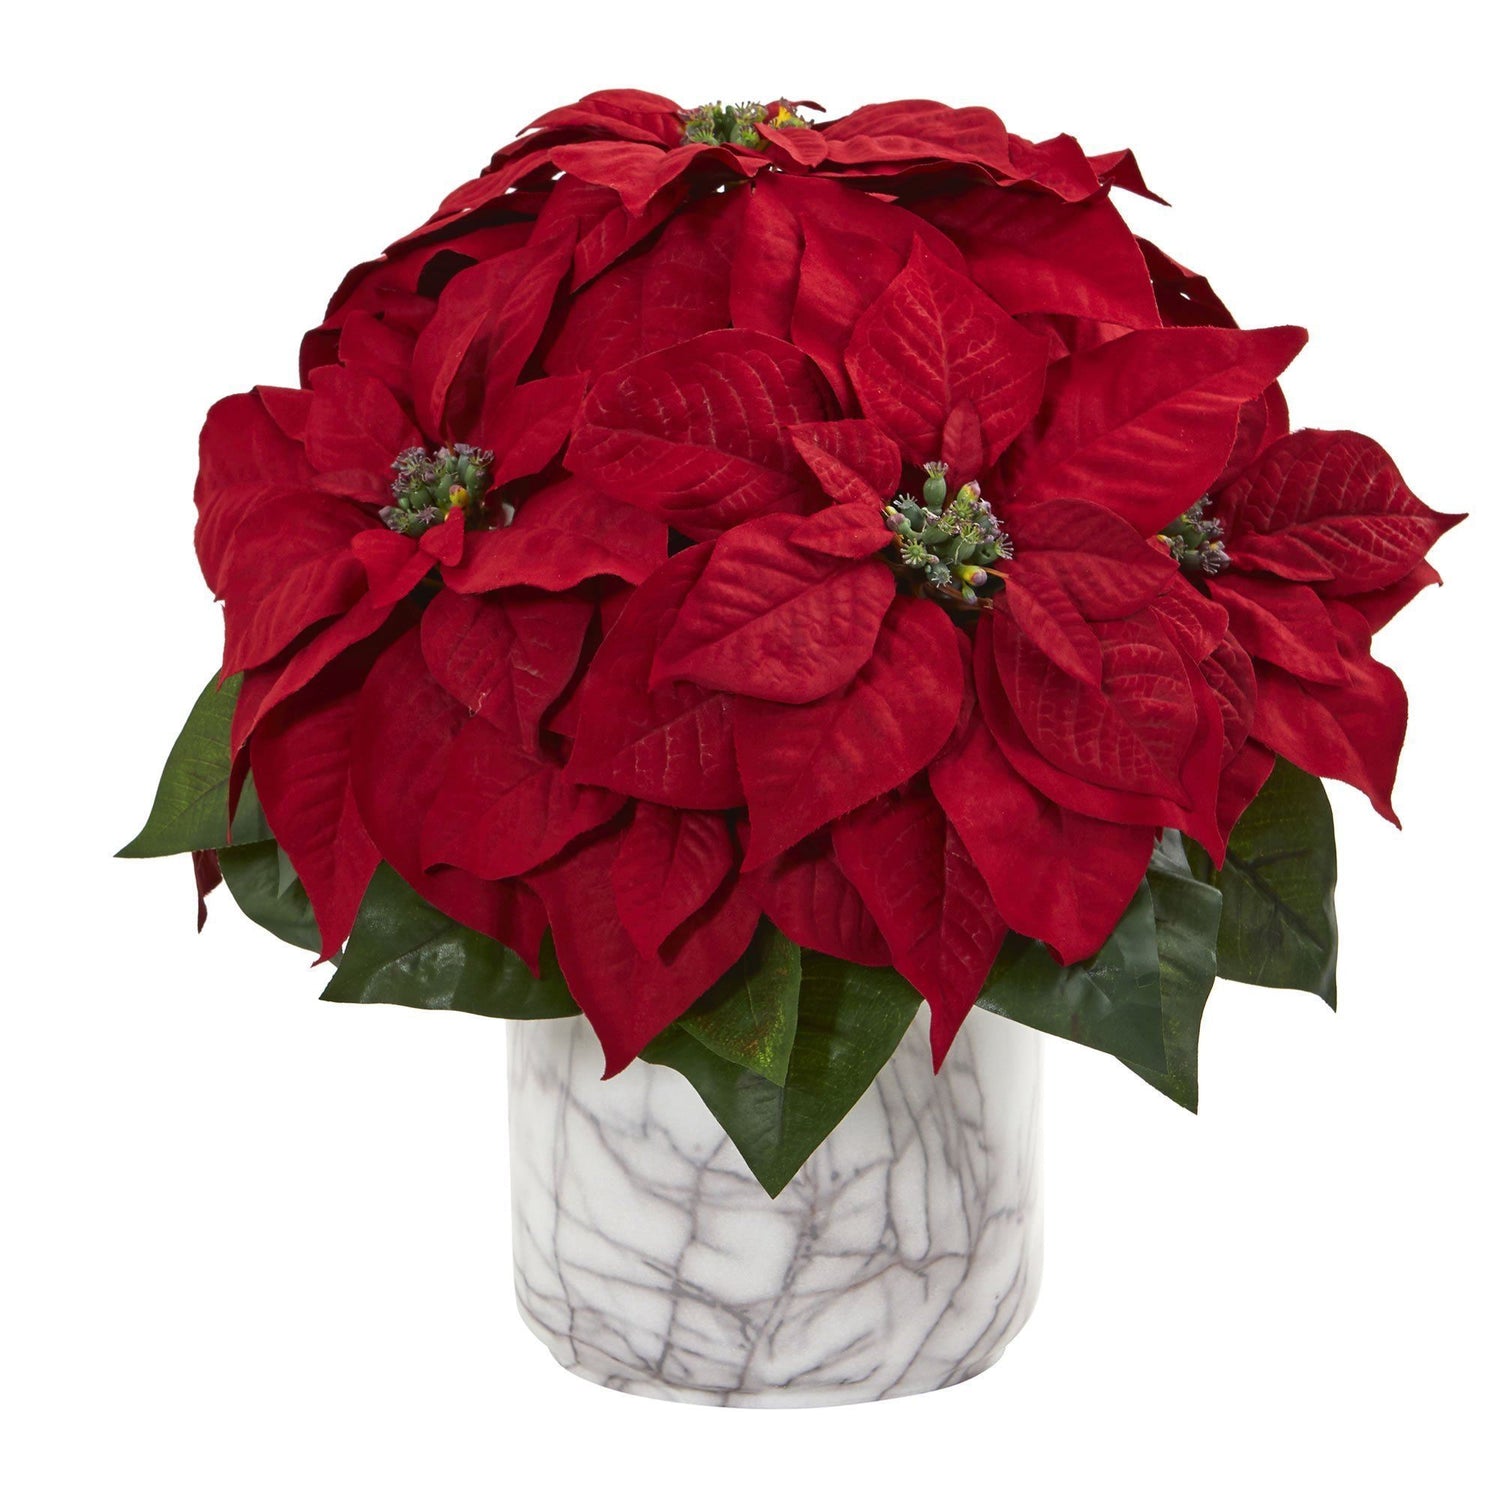 15” Poinsettia Artificial Arrangement in Marble Finished Vase